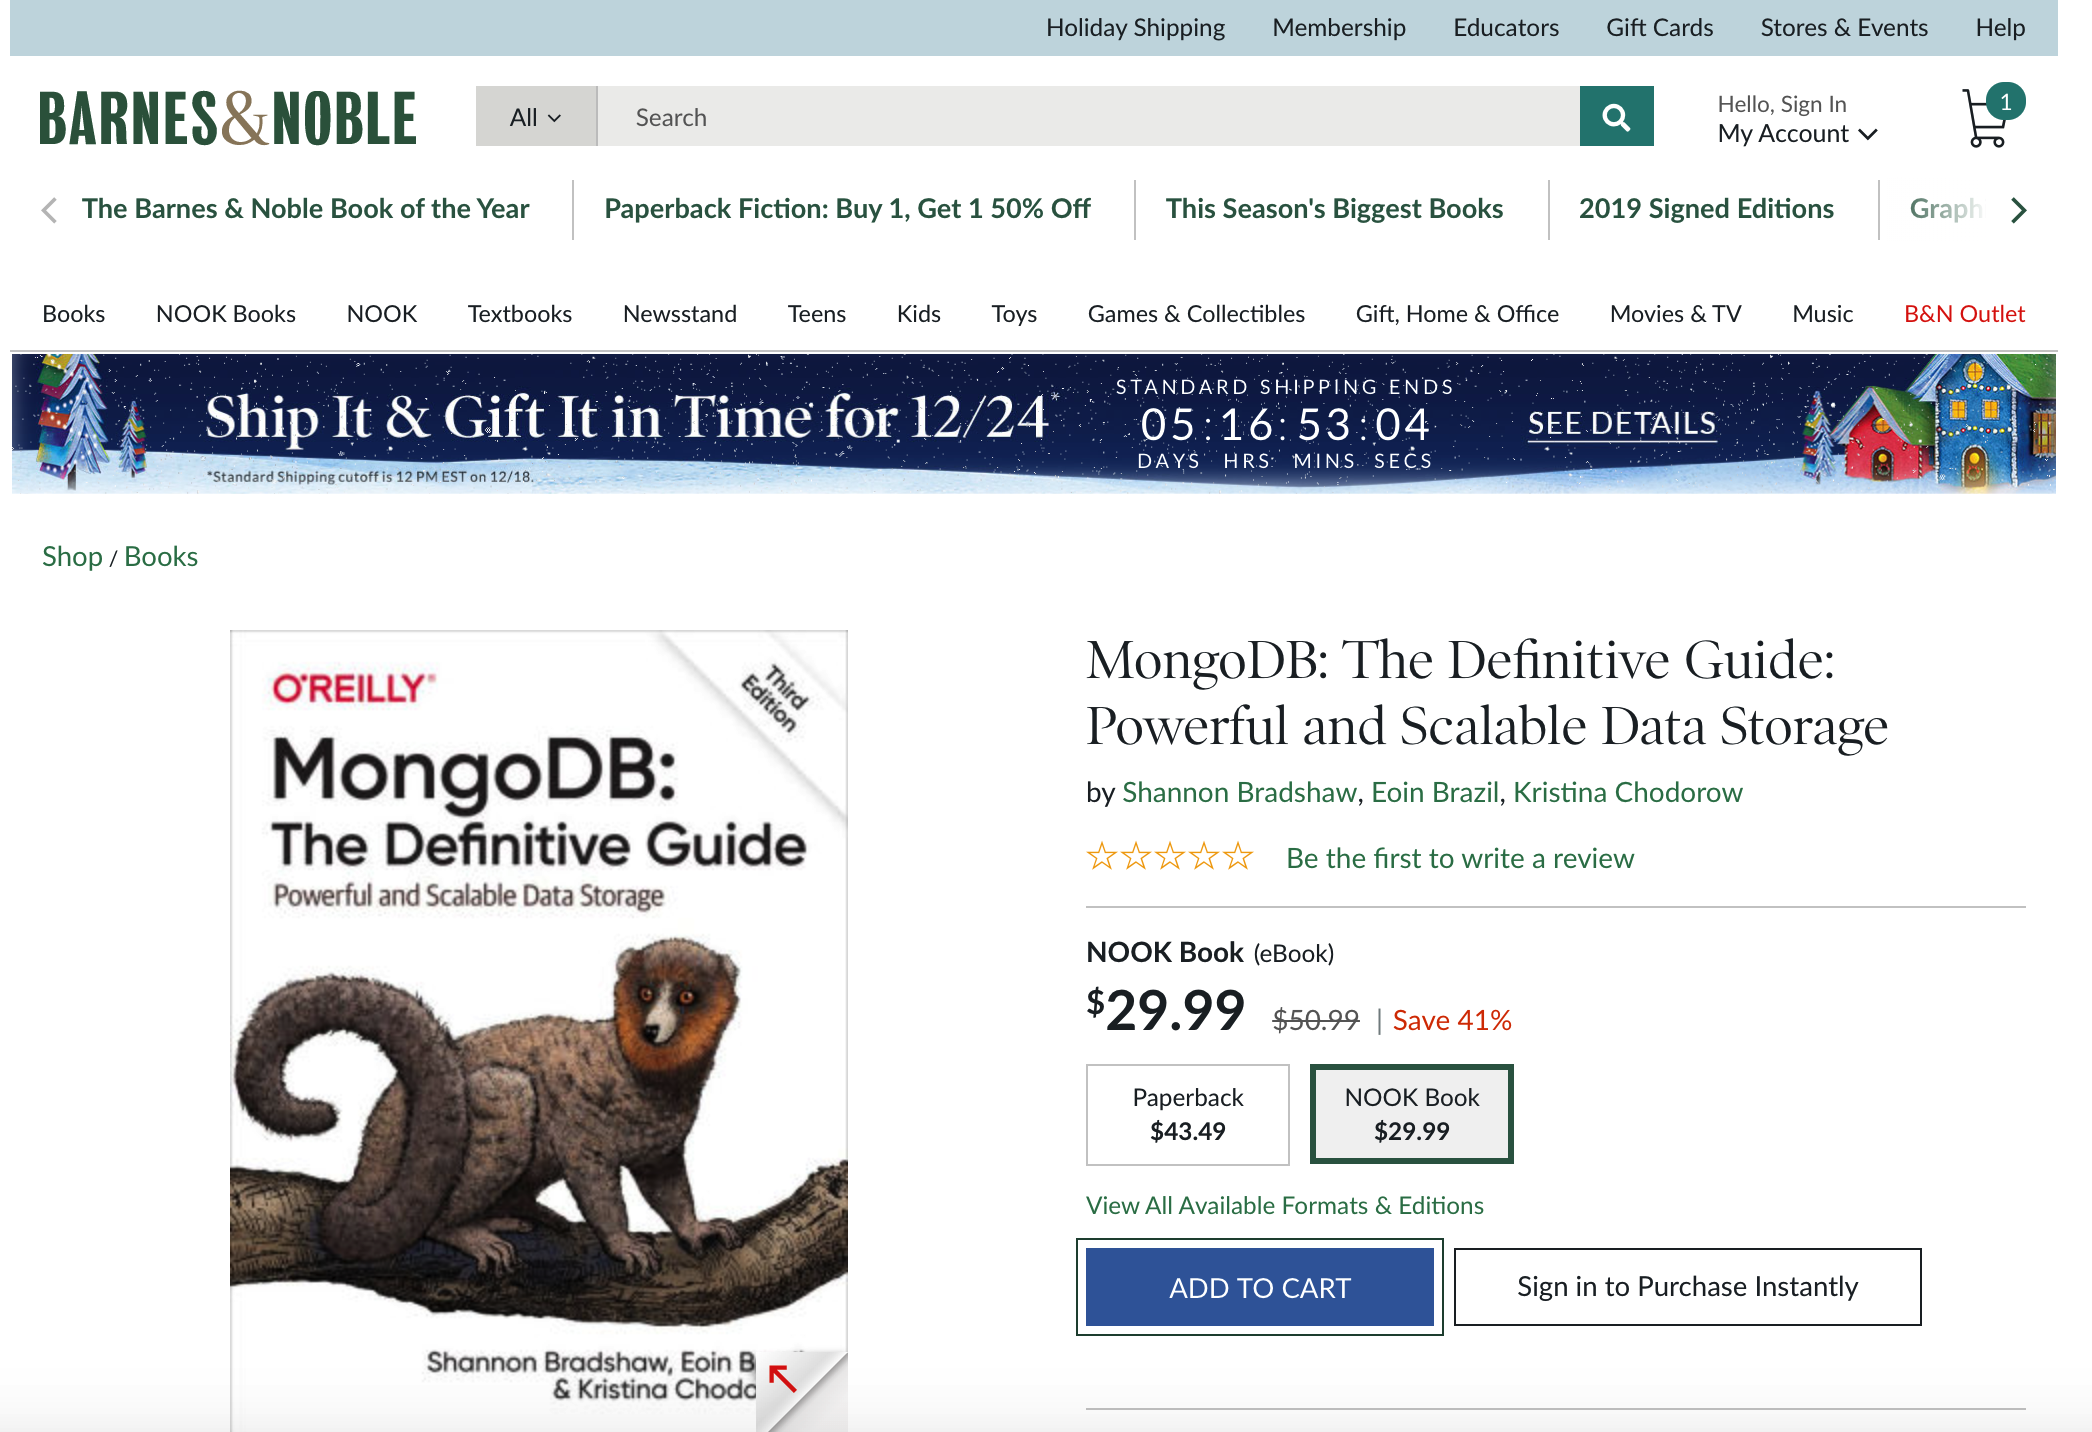 MongoDB: The Definitive Guide, 3rd Edition - Barnes & Noble